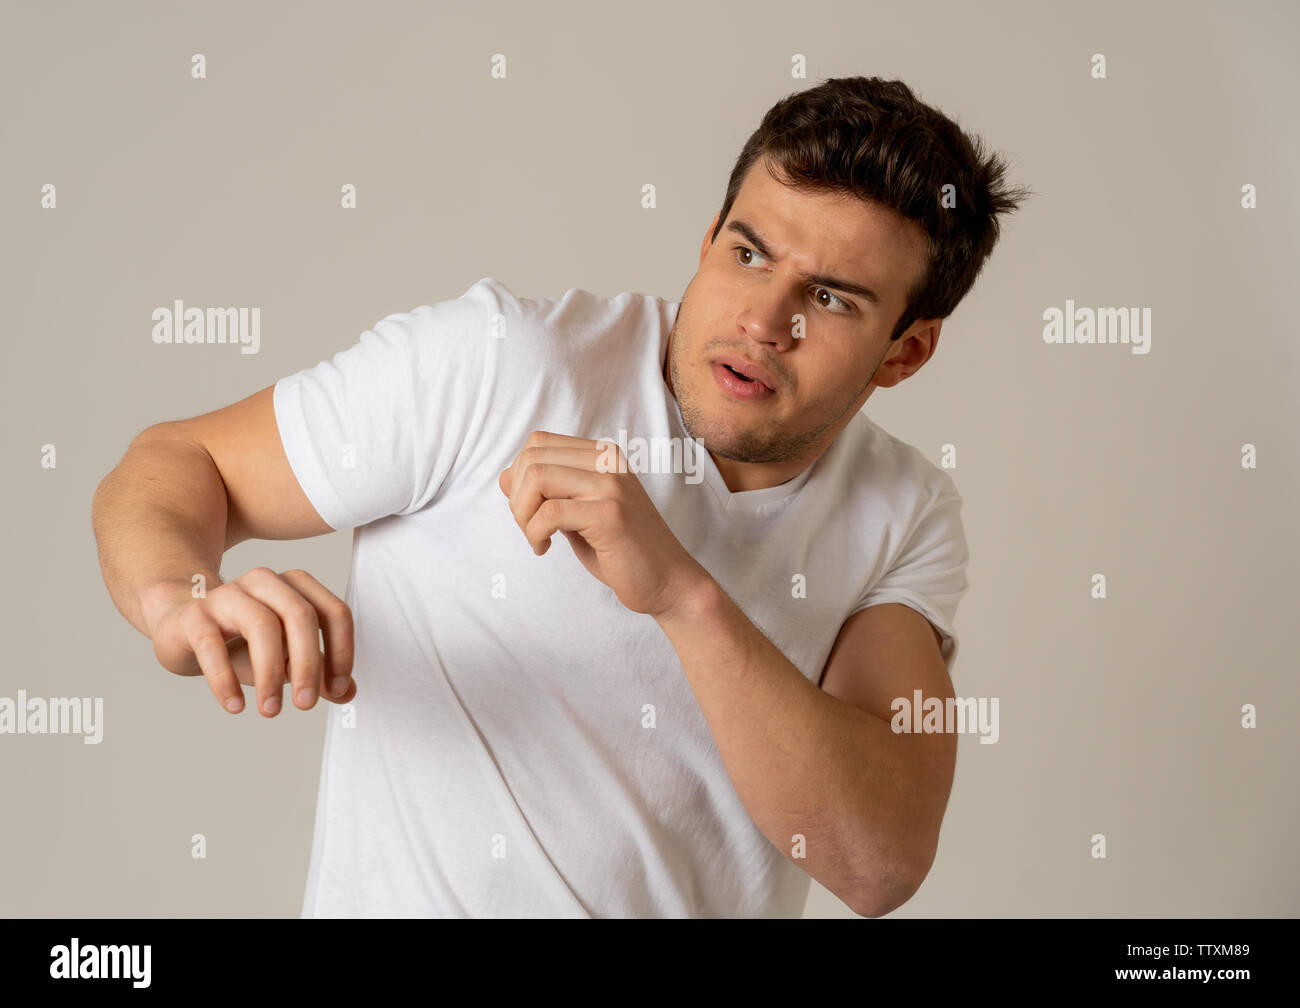 Portrait Of Young Man In Shock With A Scared Face Expression